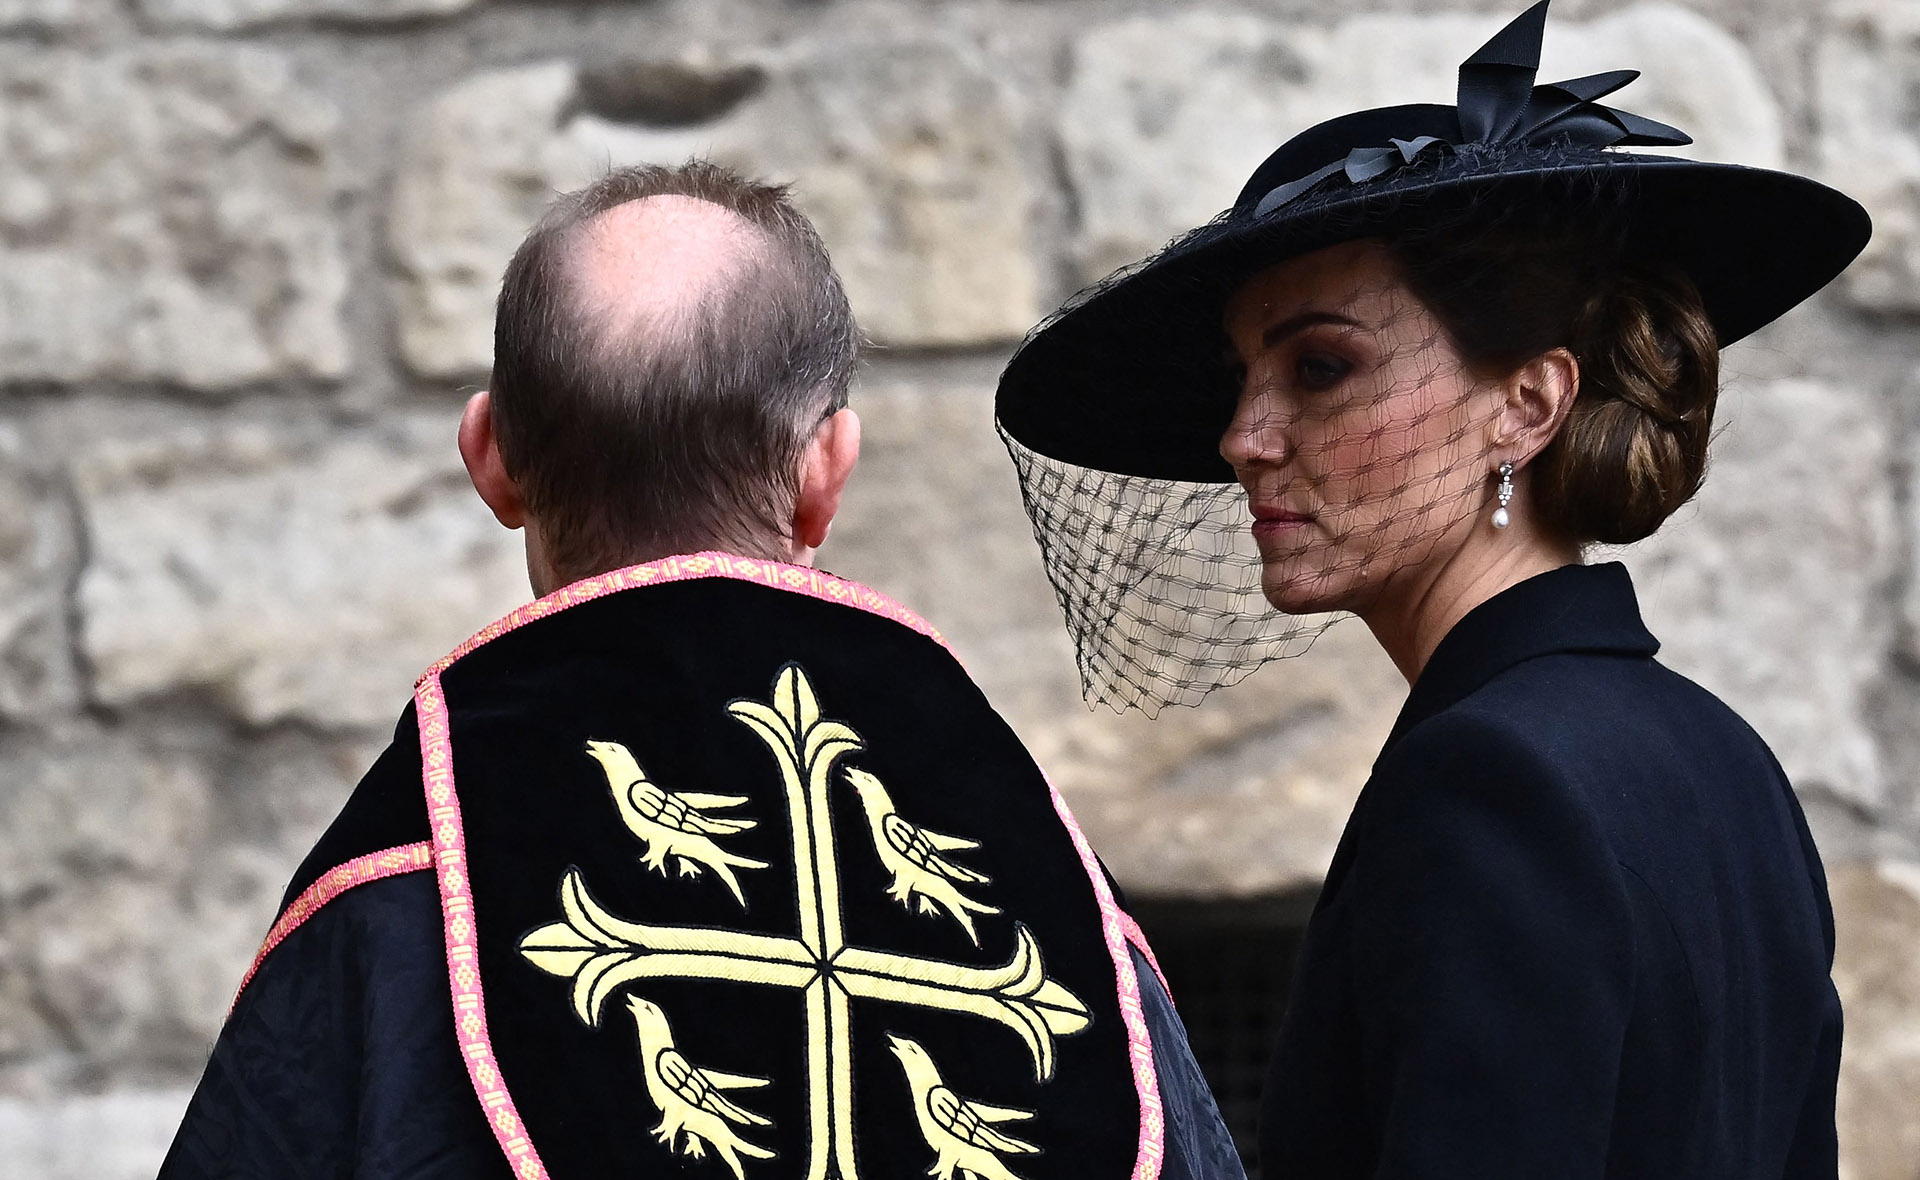 Catherine, Princess of Wales honours the Queen with touching tribute in funeral outfit